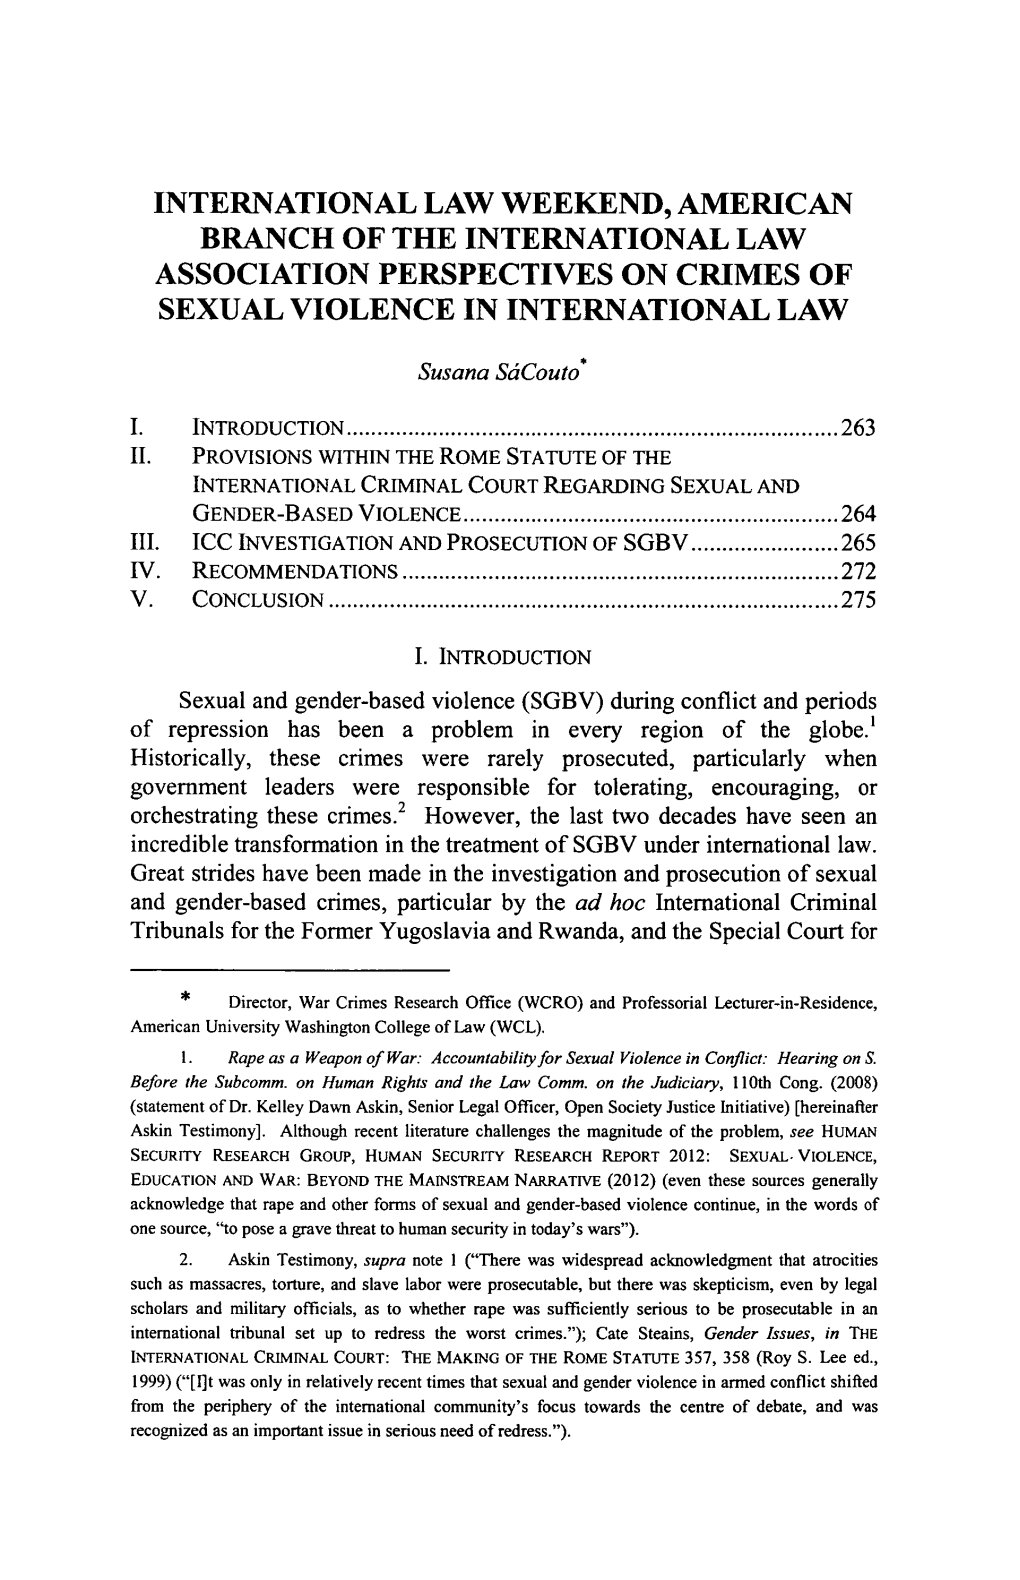 International Law Weekend, American Branch of the International Law Association Perspectives on Crimes of Sexual Violence in International Law